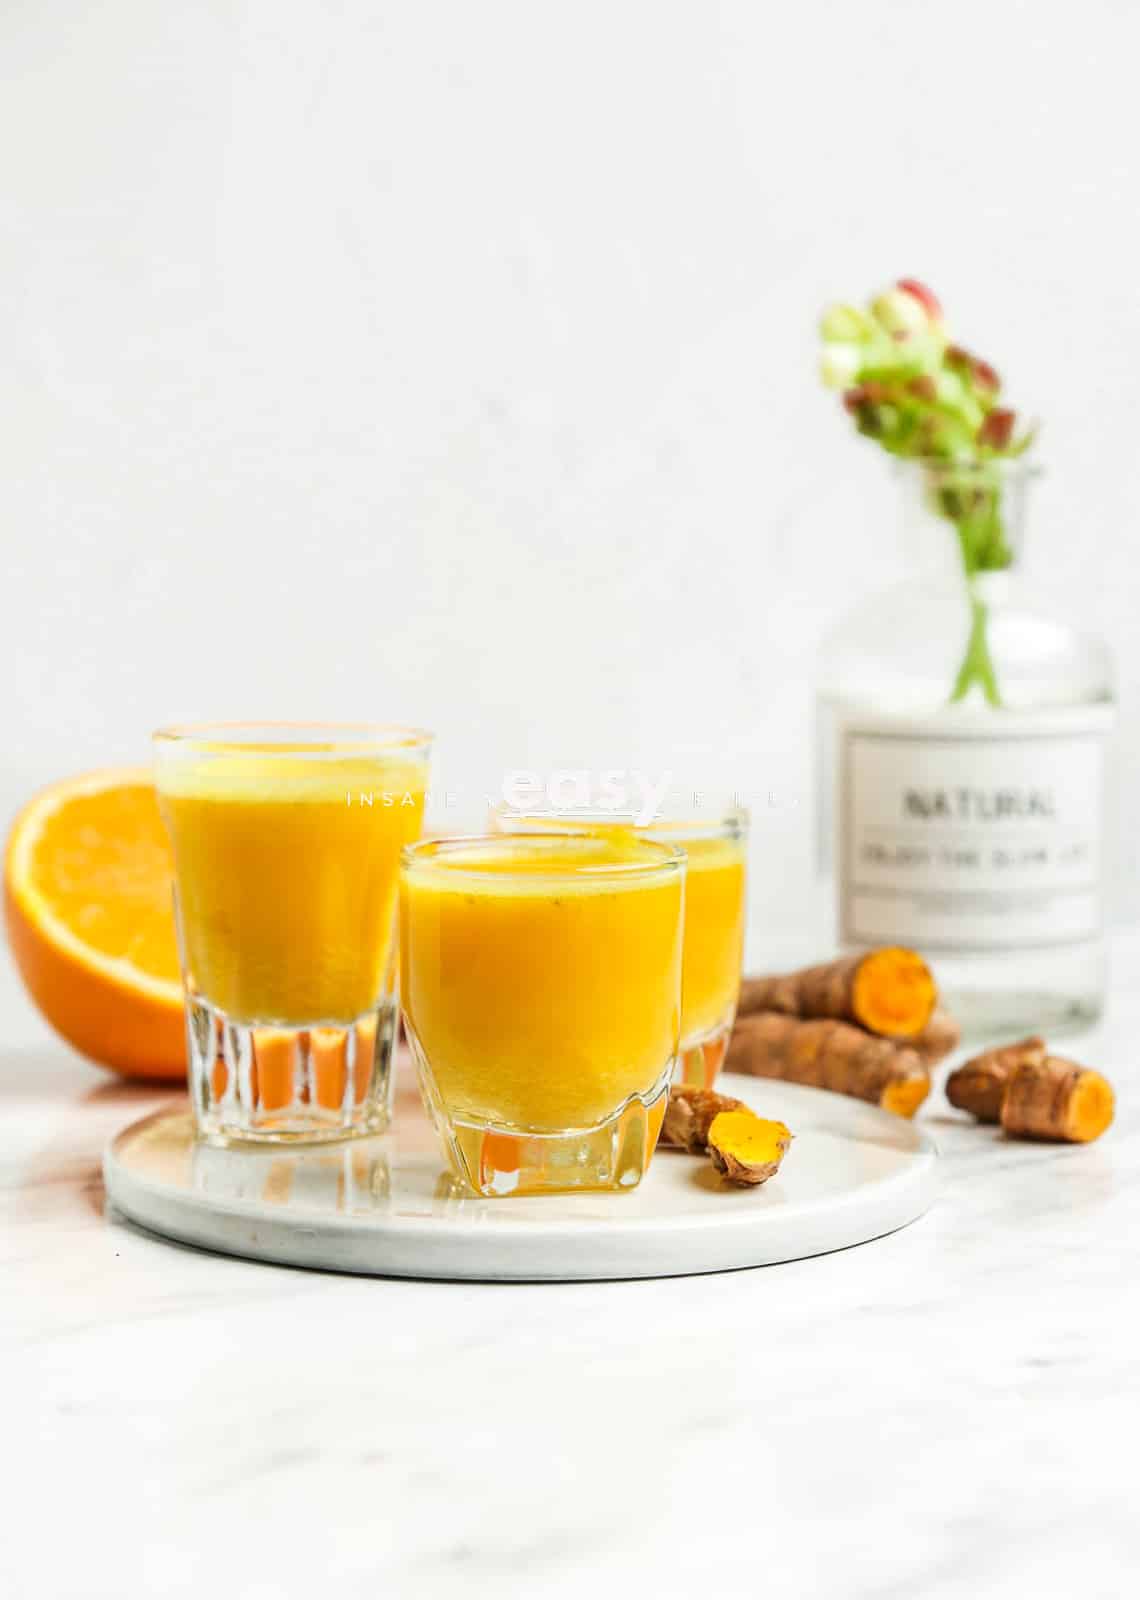 Photo of 3 shot glasses filled with turmeric shots, on a white plate.  There are sliced oranges, fresh turmeric, and flowers in a jar in the background. 